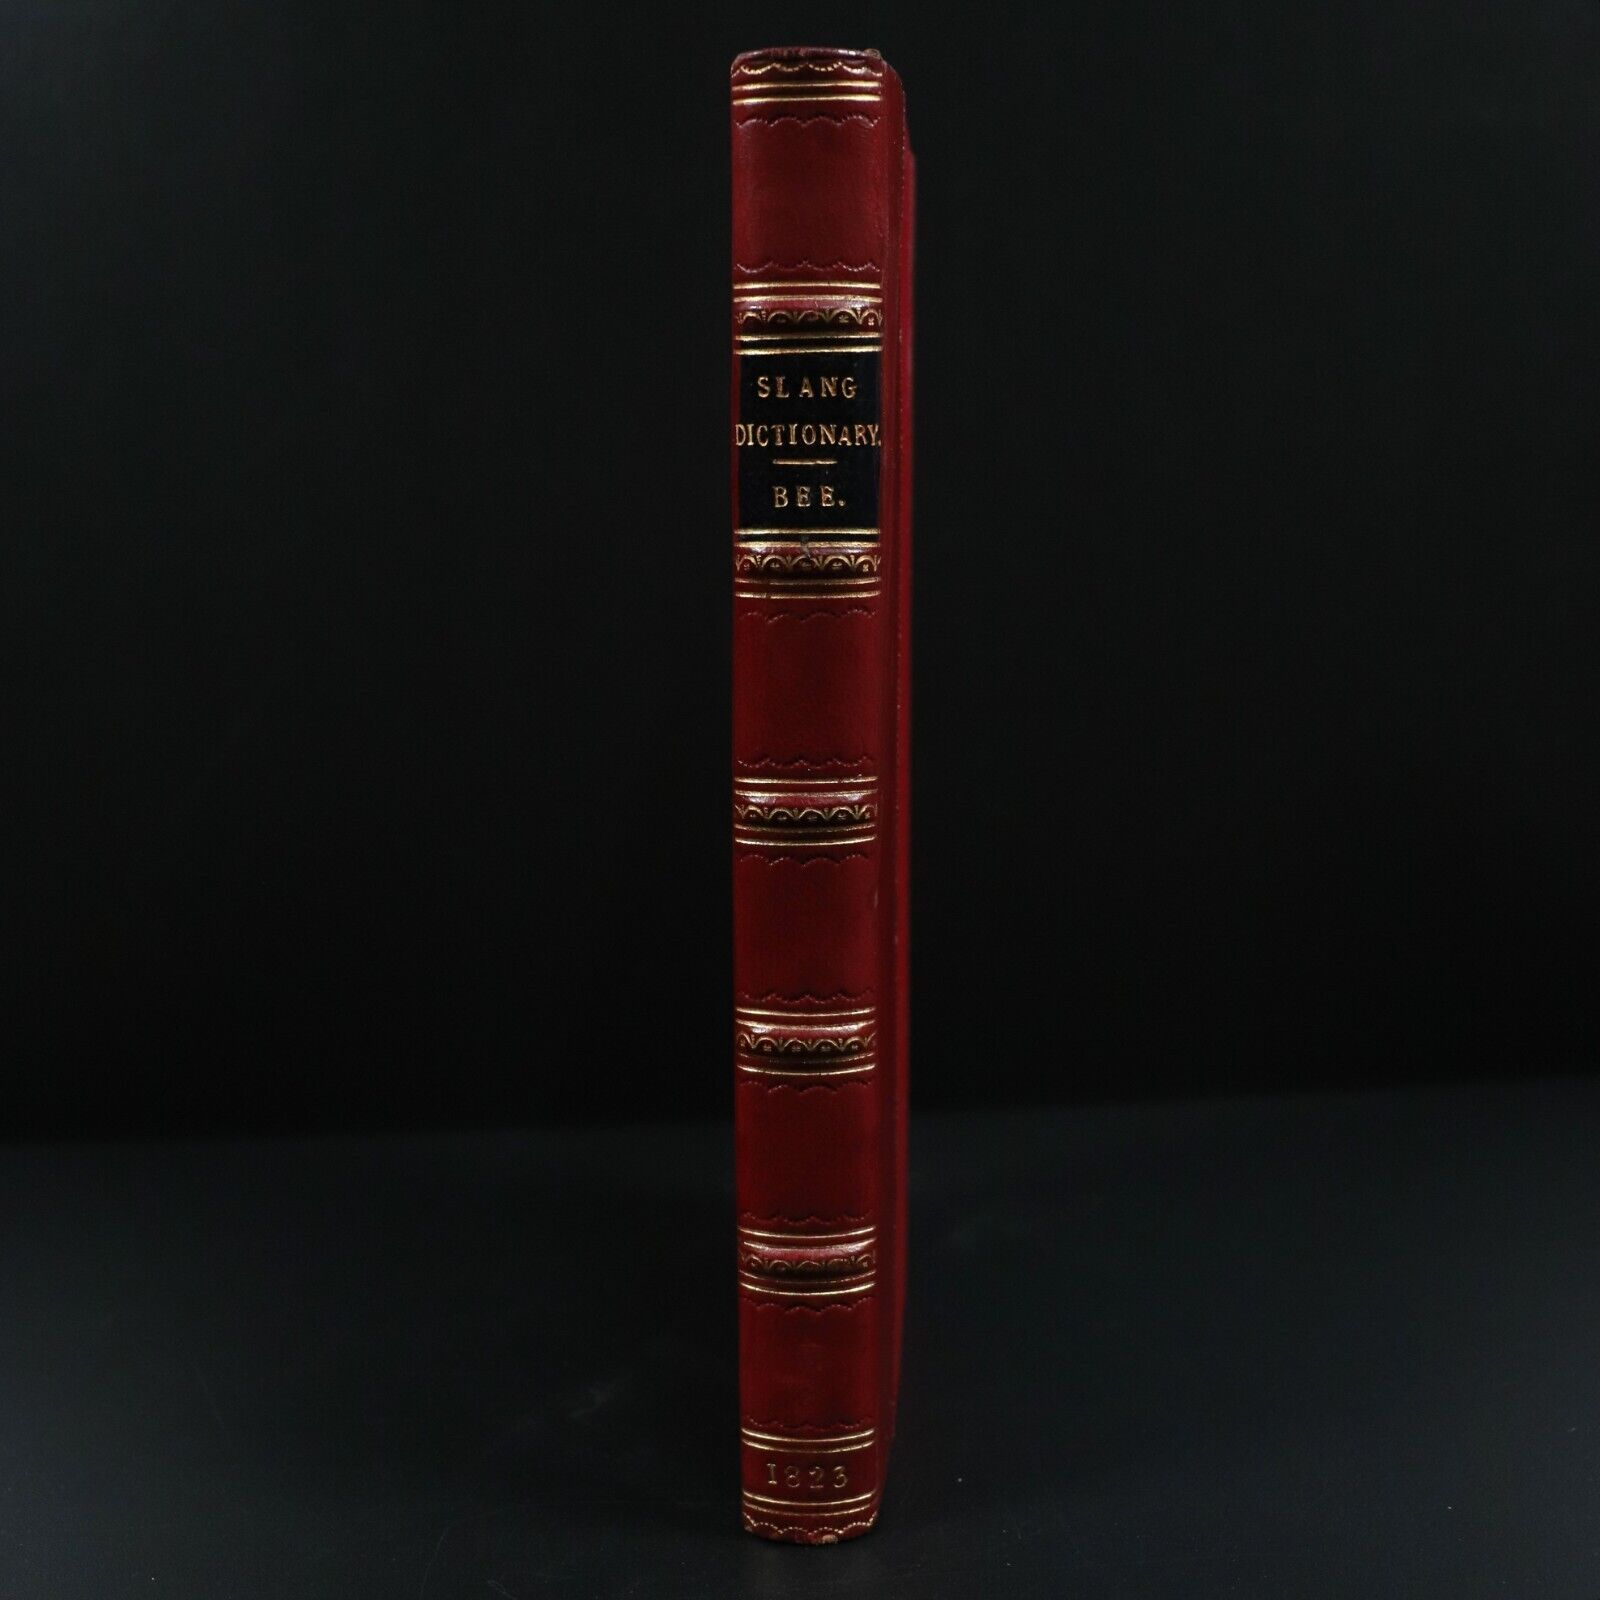 1823 A Slang Dictionary by Jon Bee Antiquarian English Language Reference Book